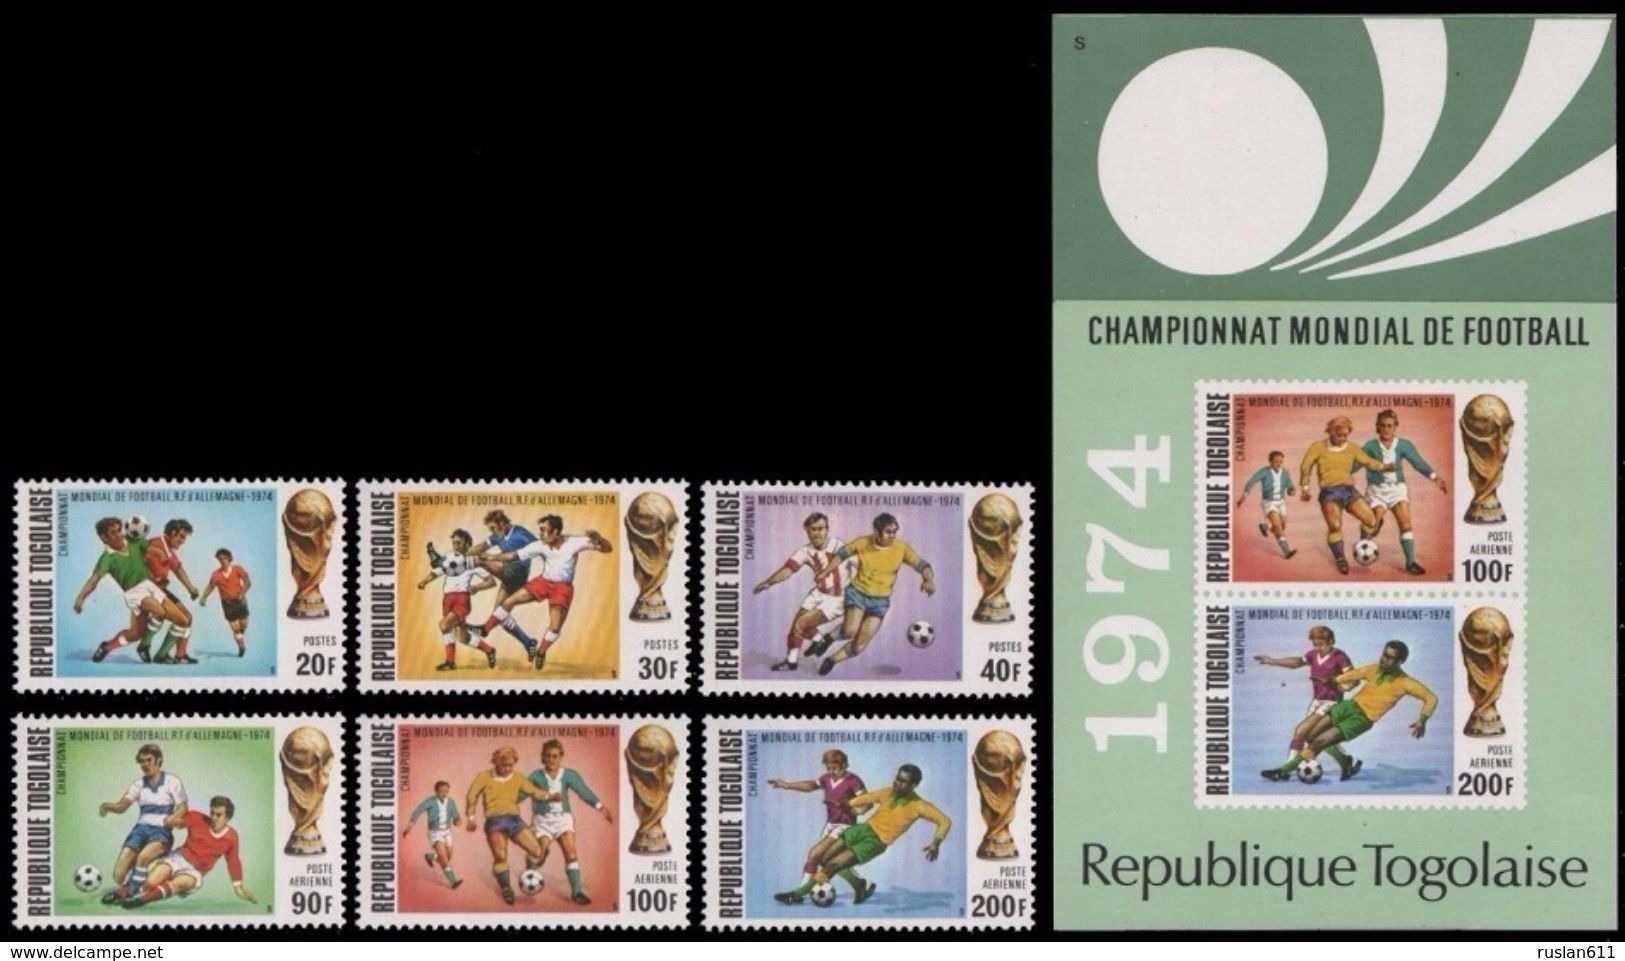 Soccer Football Togo #1017/22 + Bl 81 1974 World Cup Germany MNH ** - 1974 – West Germany